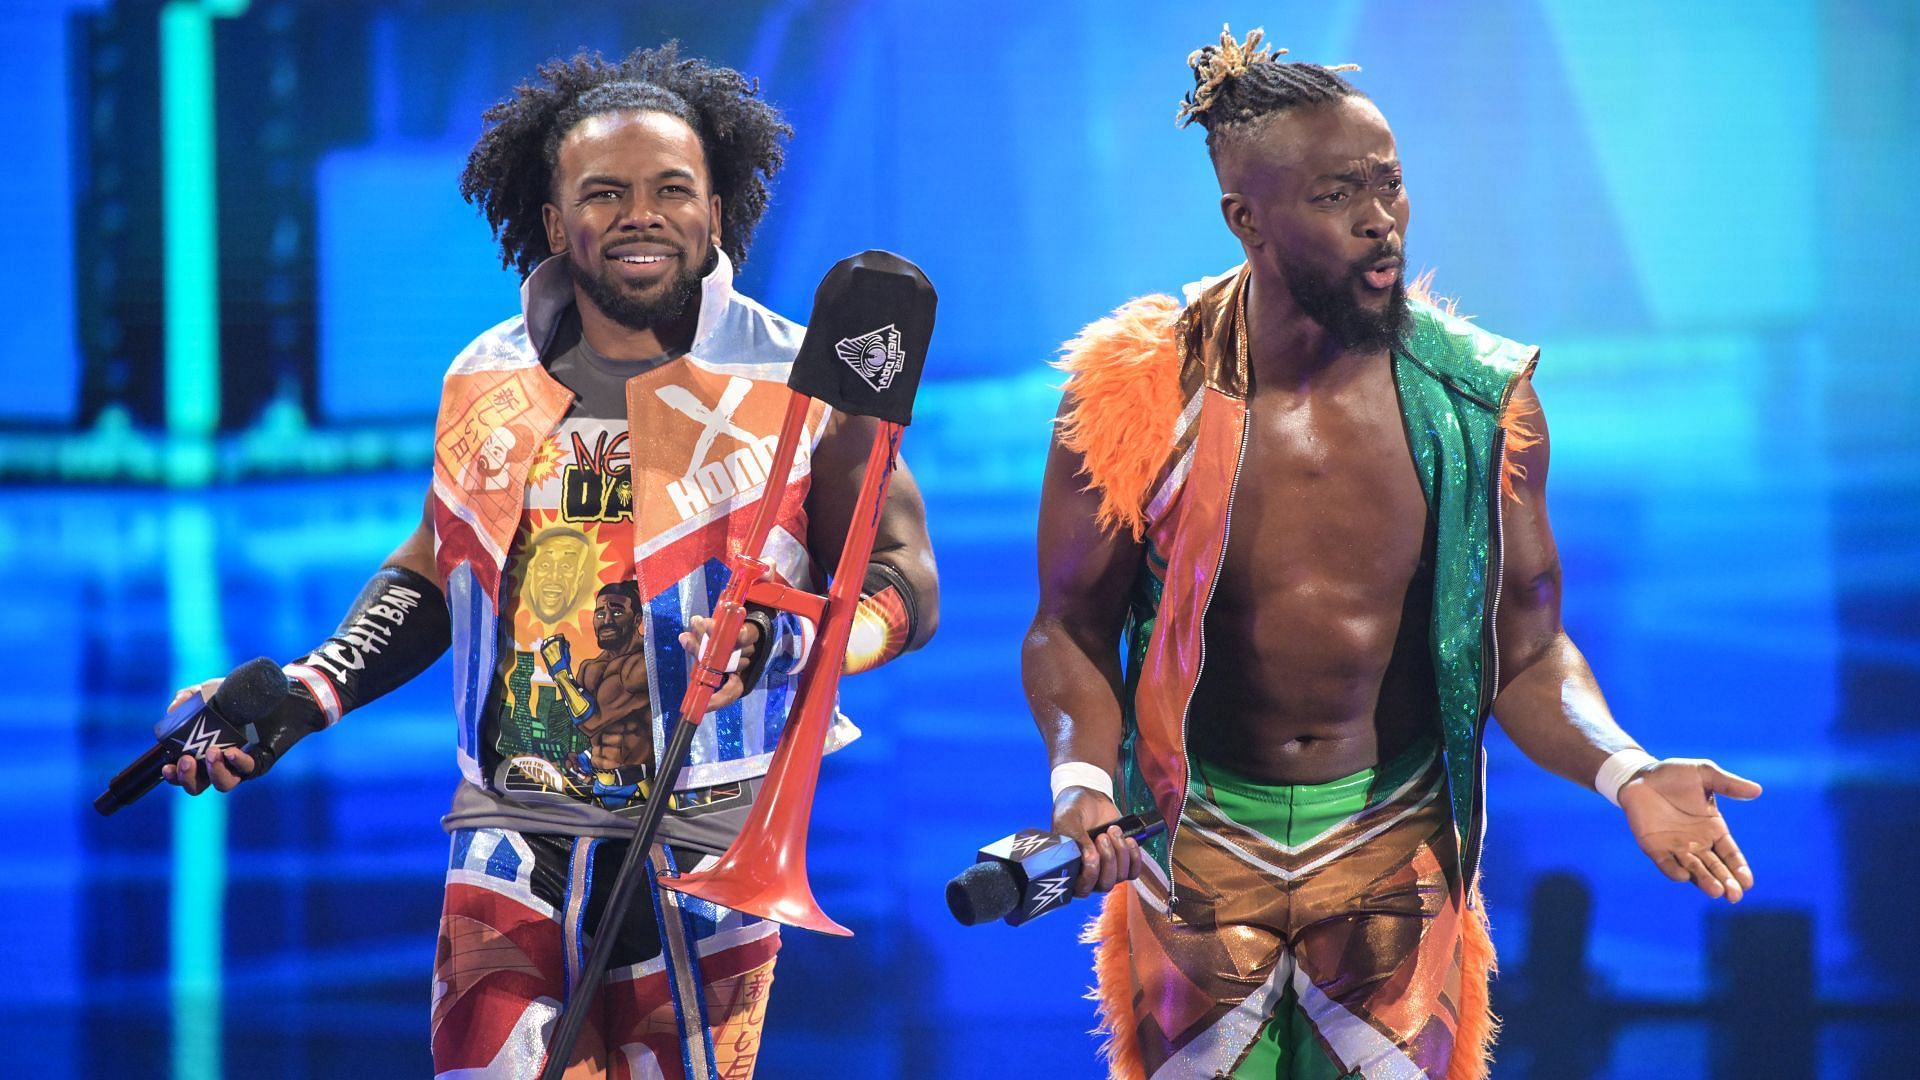 The New Day on SmackDown.